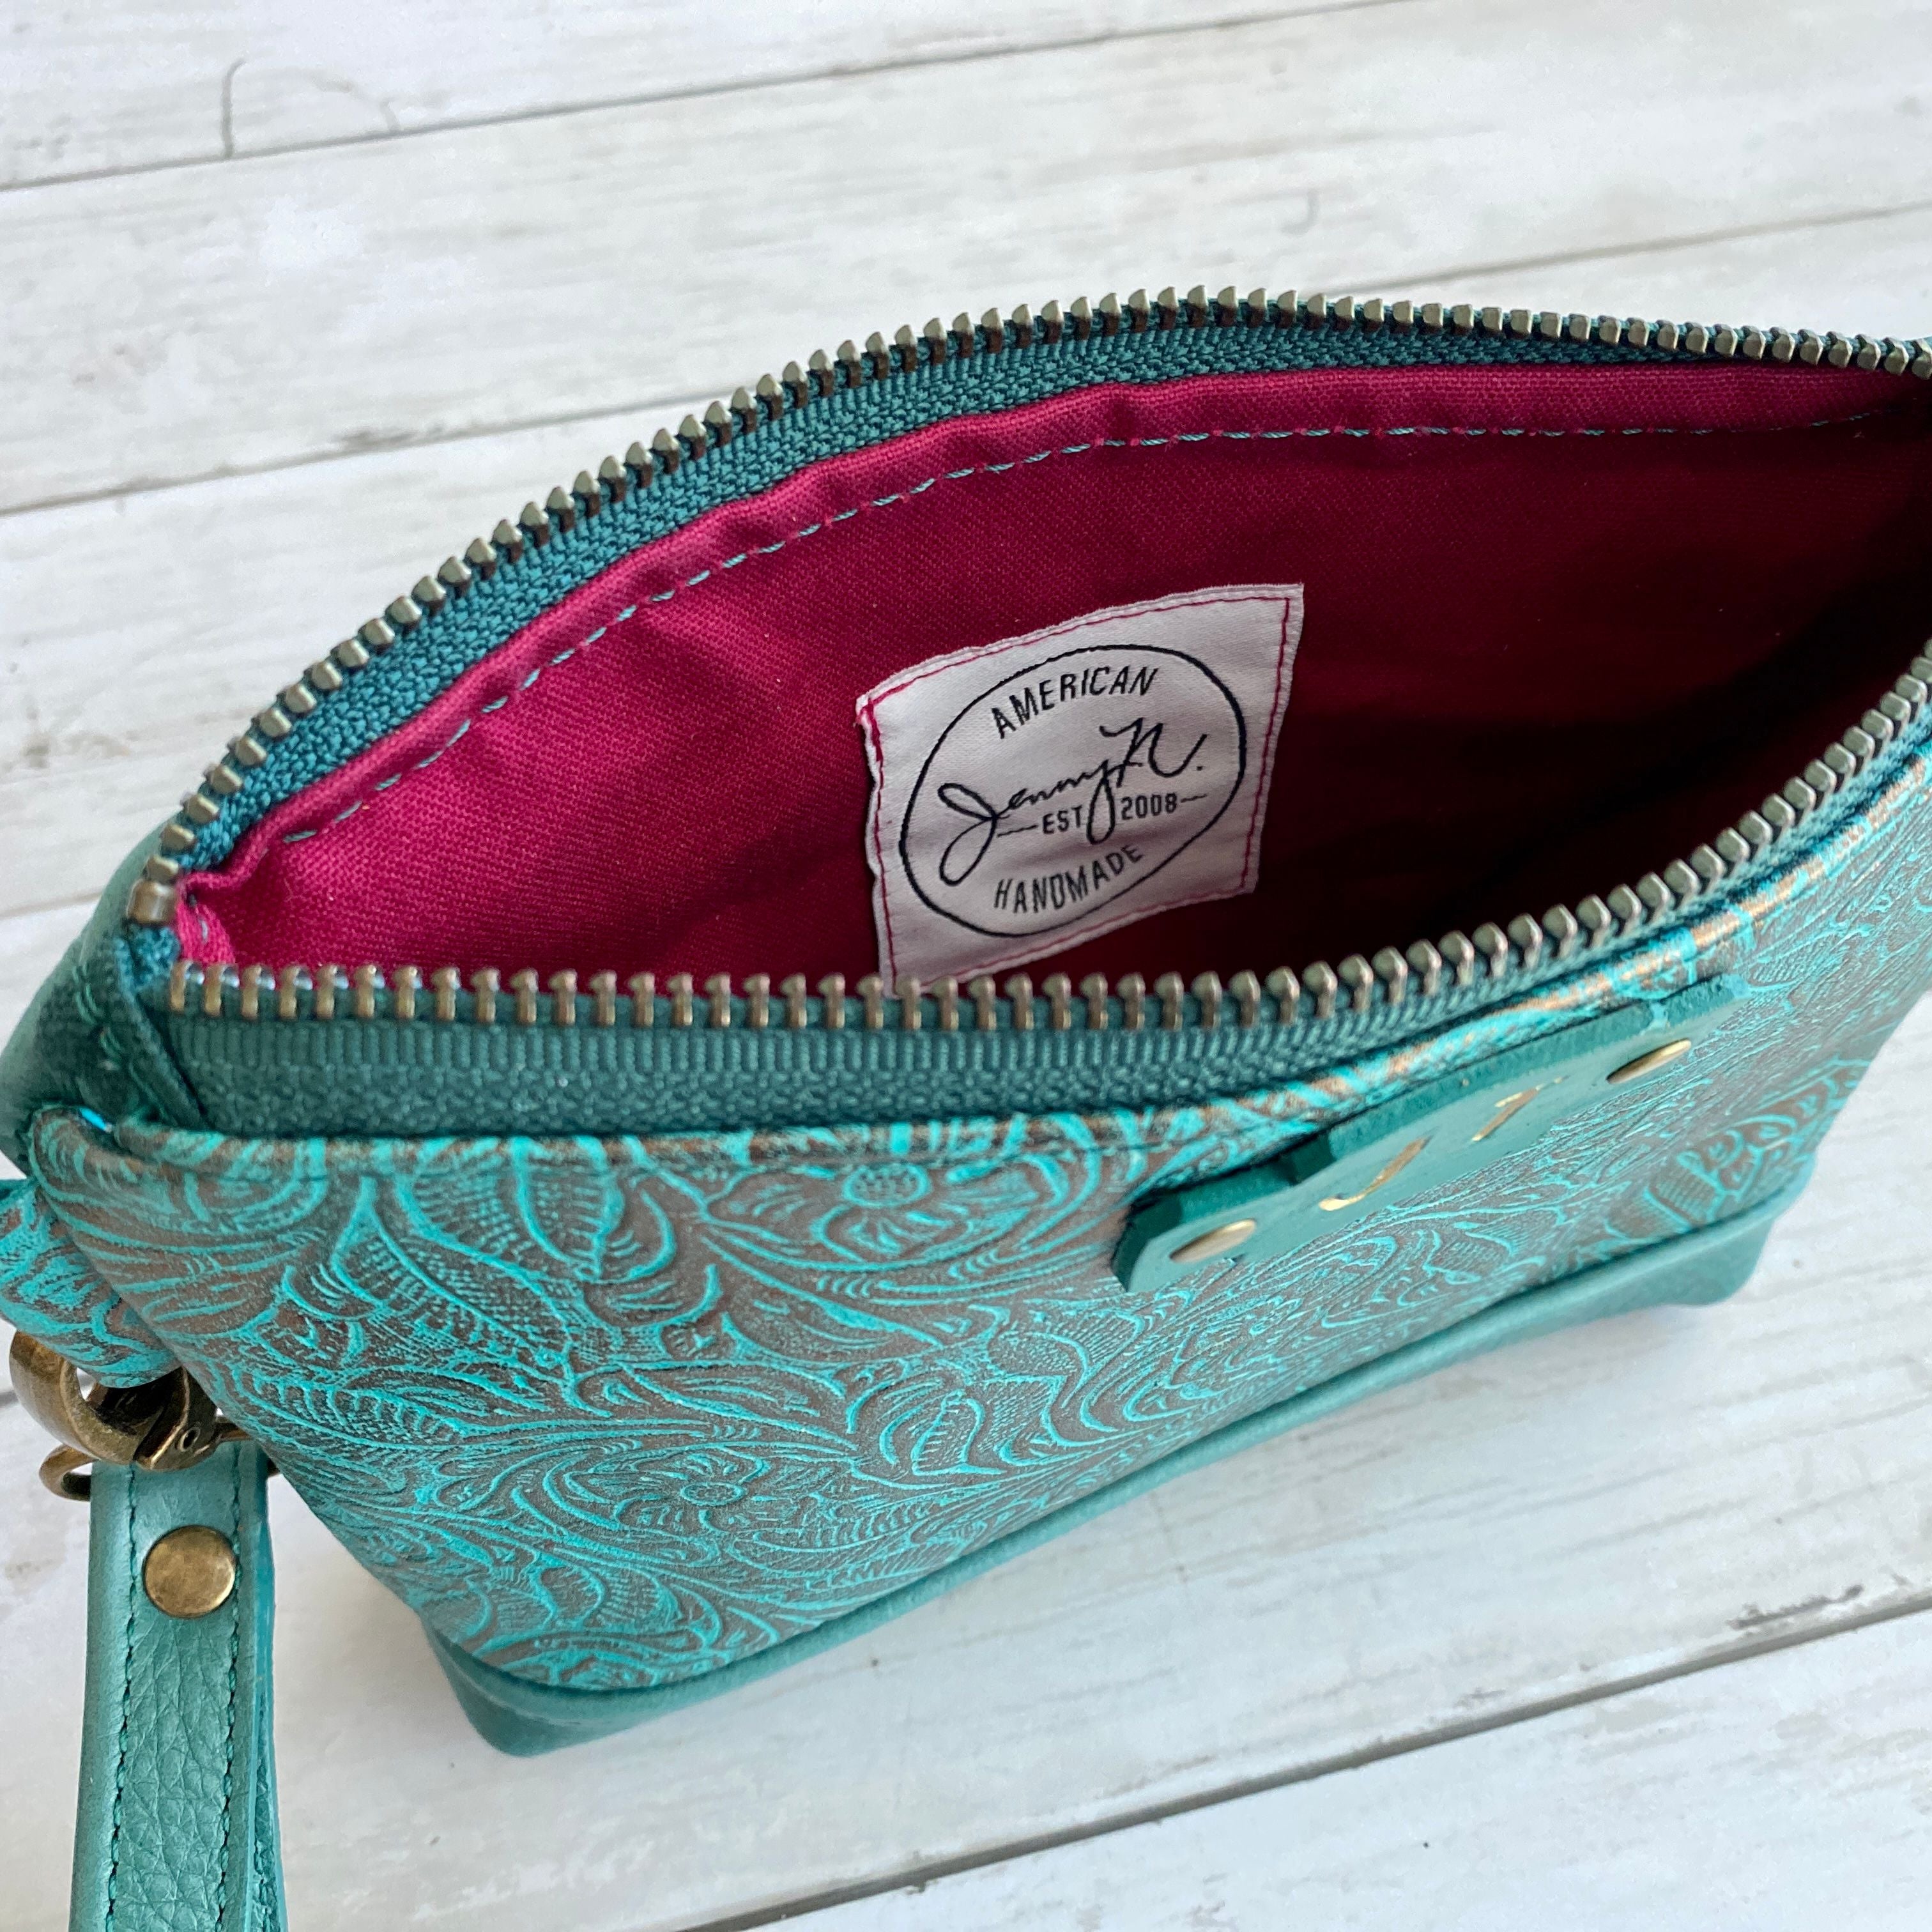 Wristlet in Turquoise, Turquoise Embossed Floral